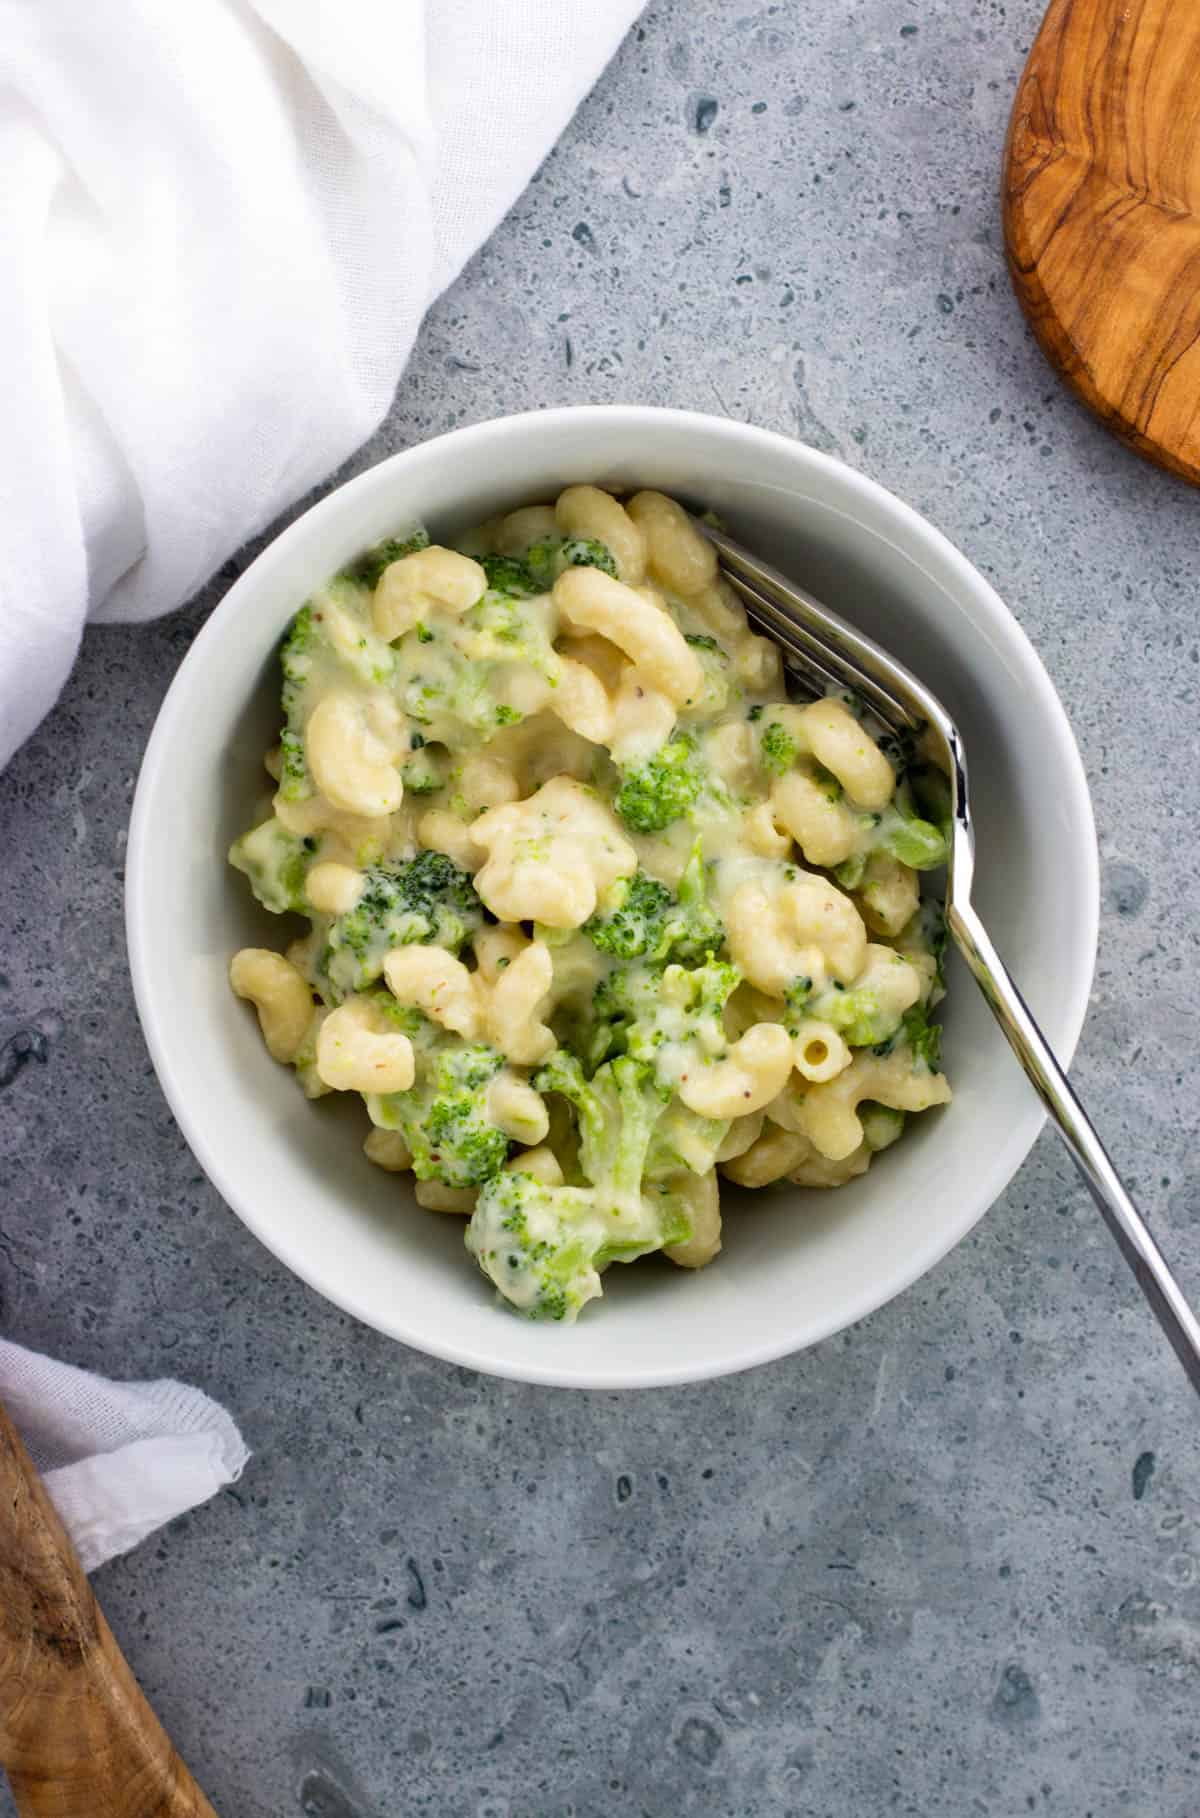 A bowl of mac and cheese and broccoli with a fork in it.